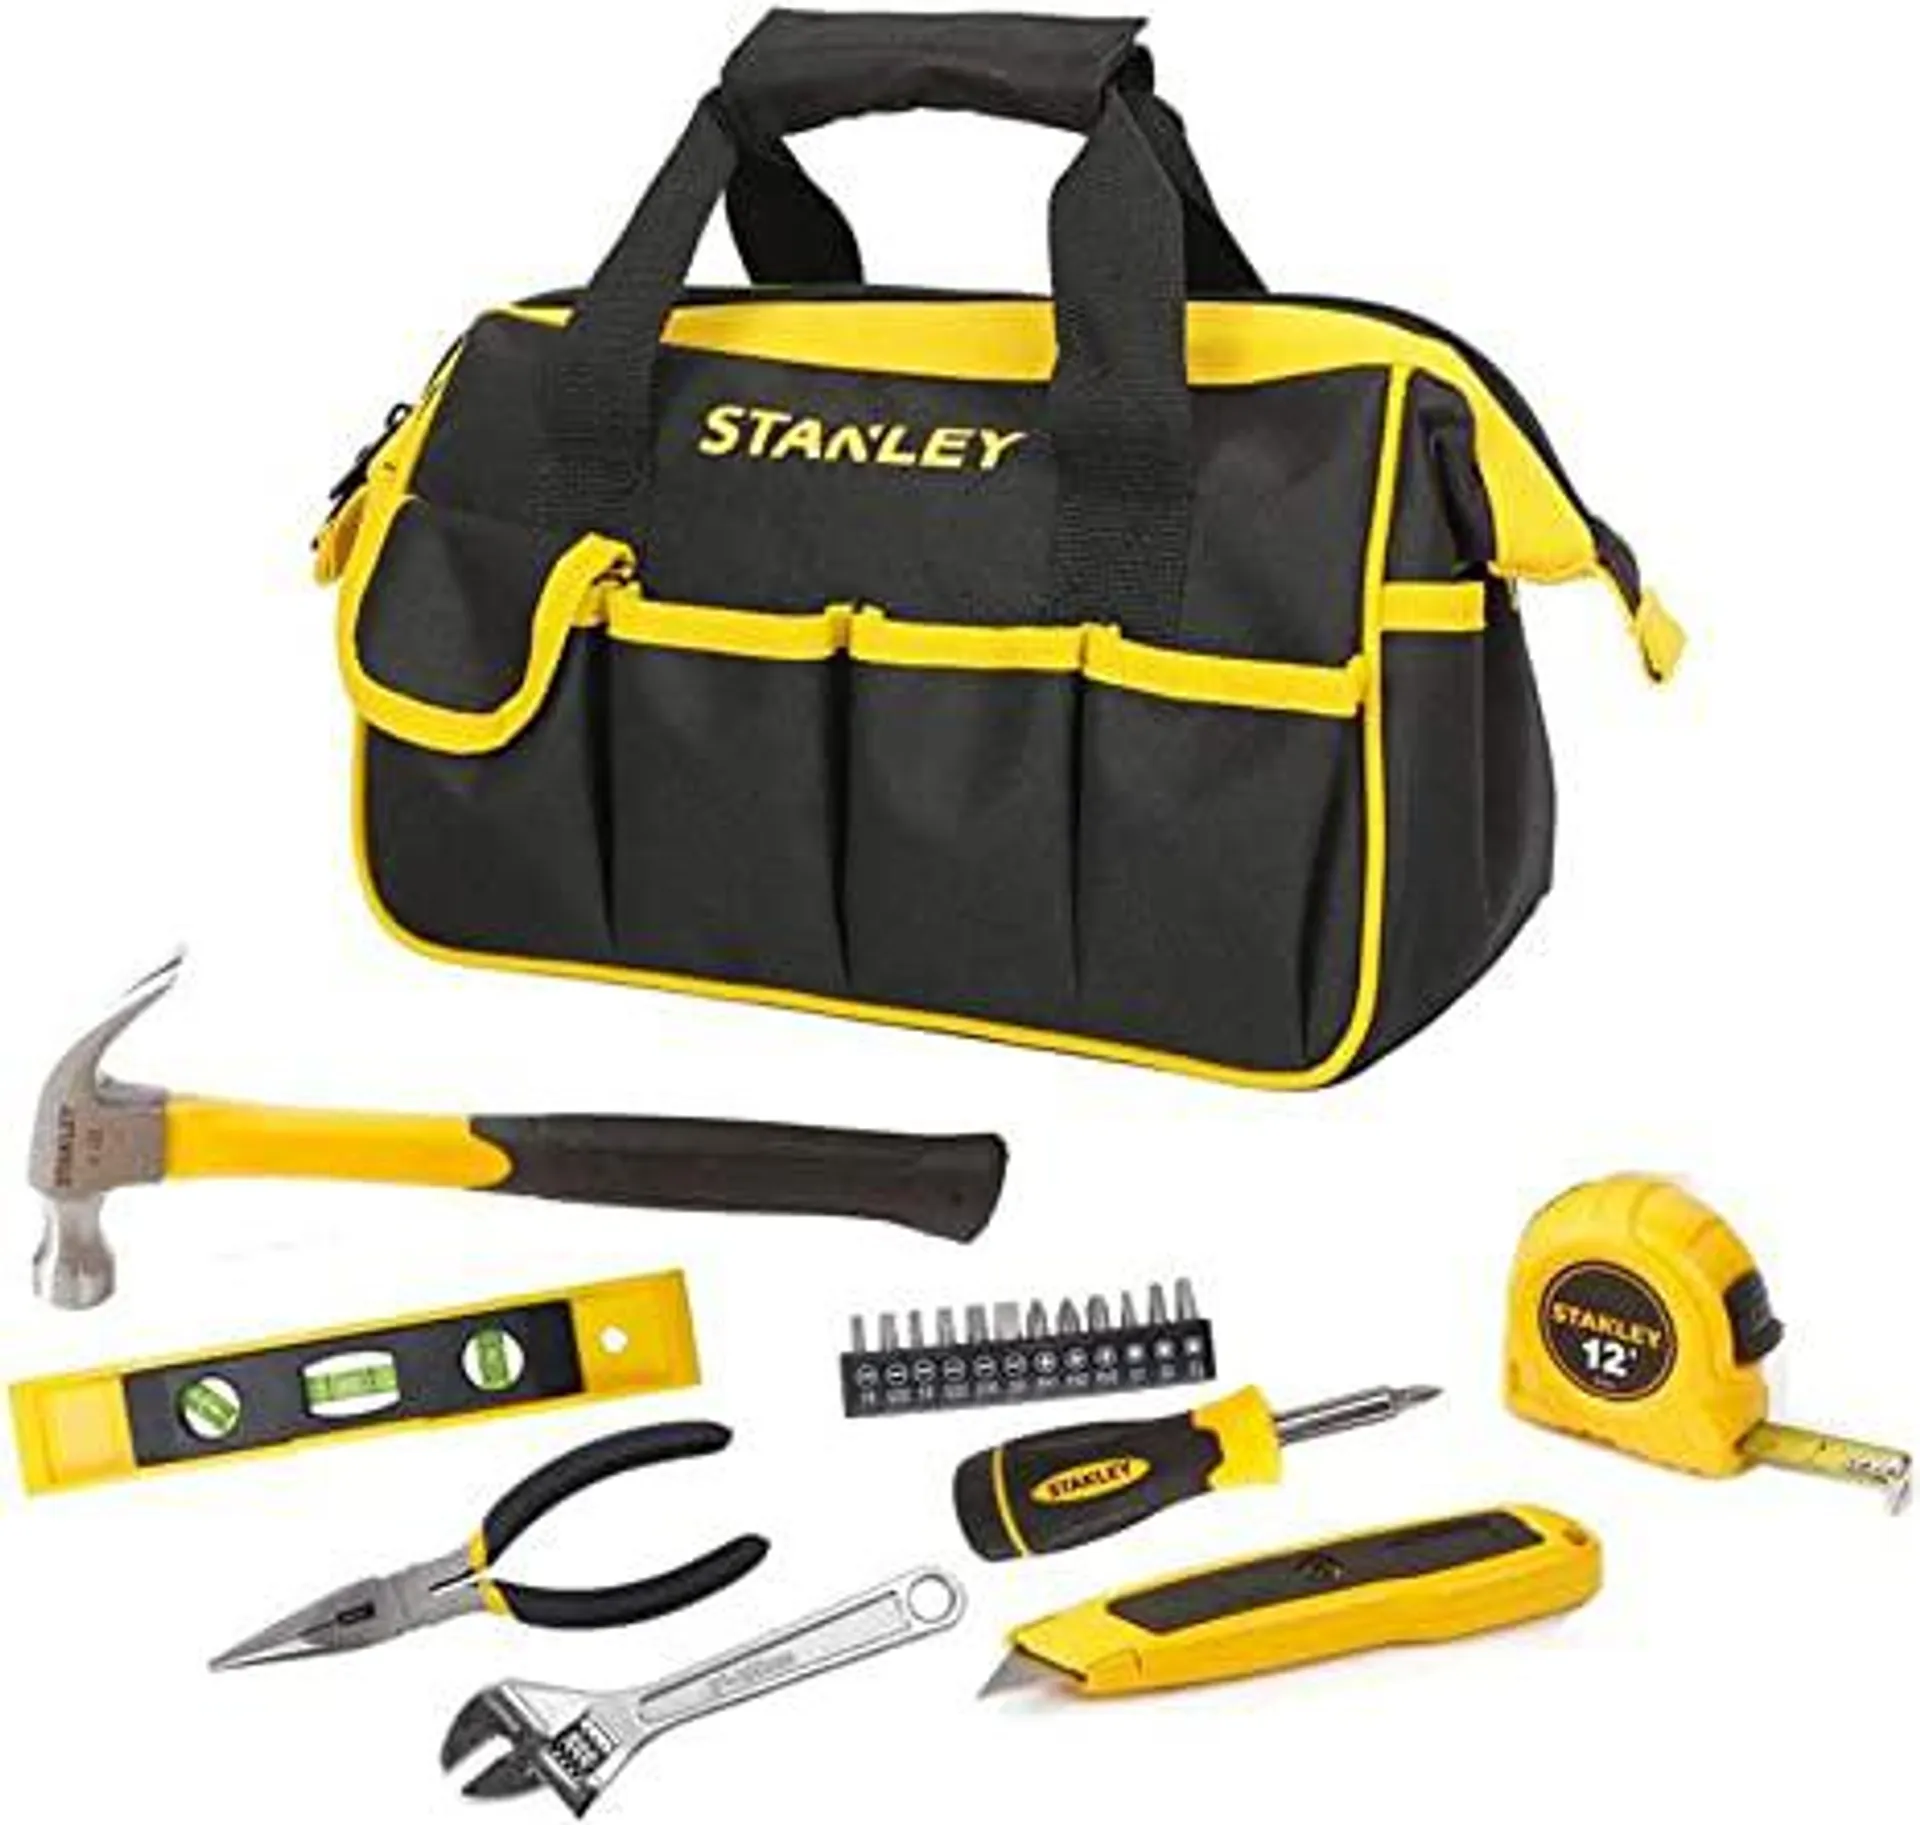 STANLEY 20PC MIXED TOOL SET